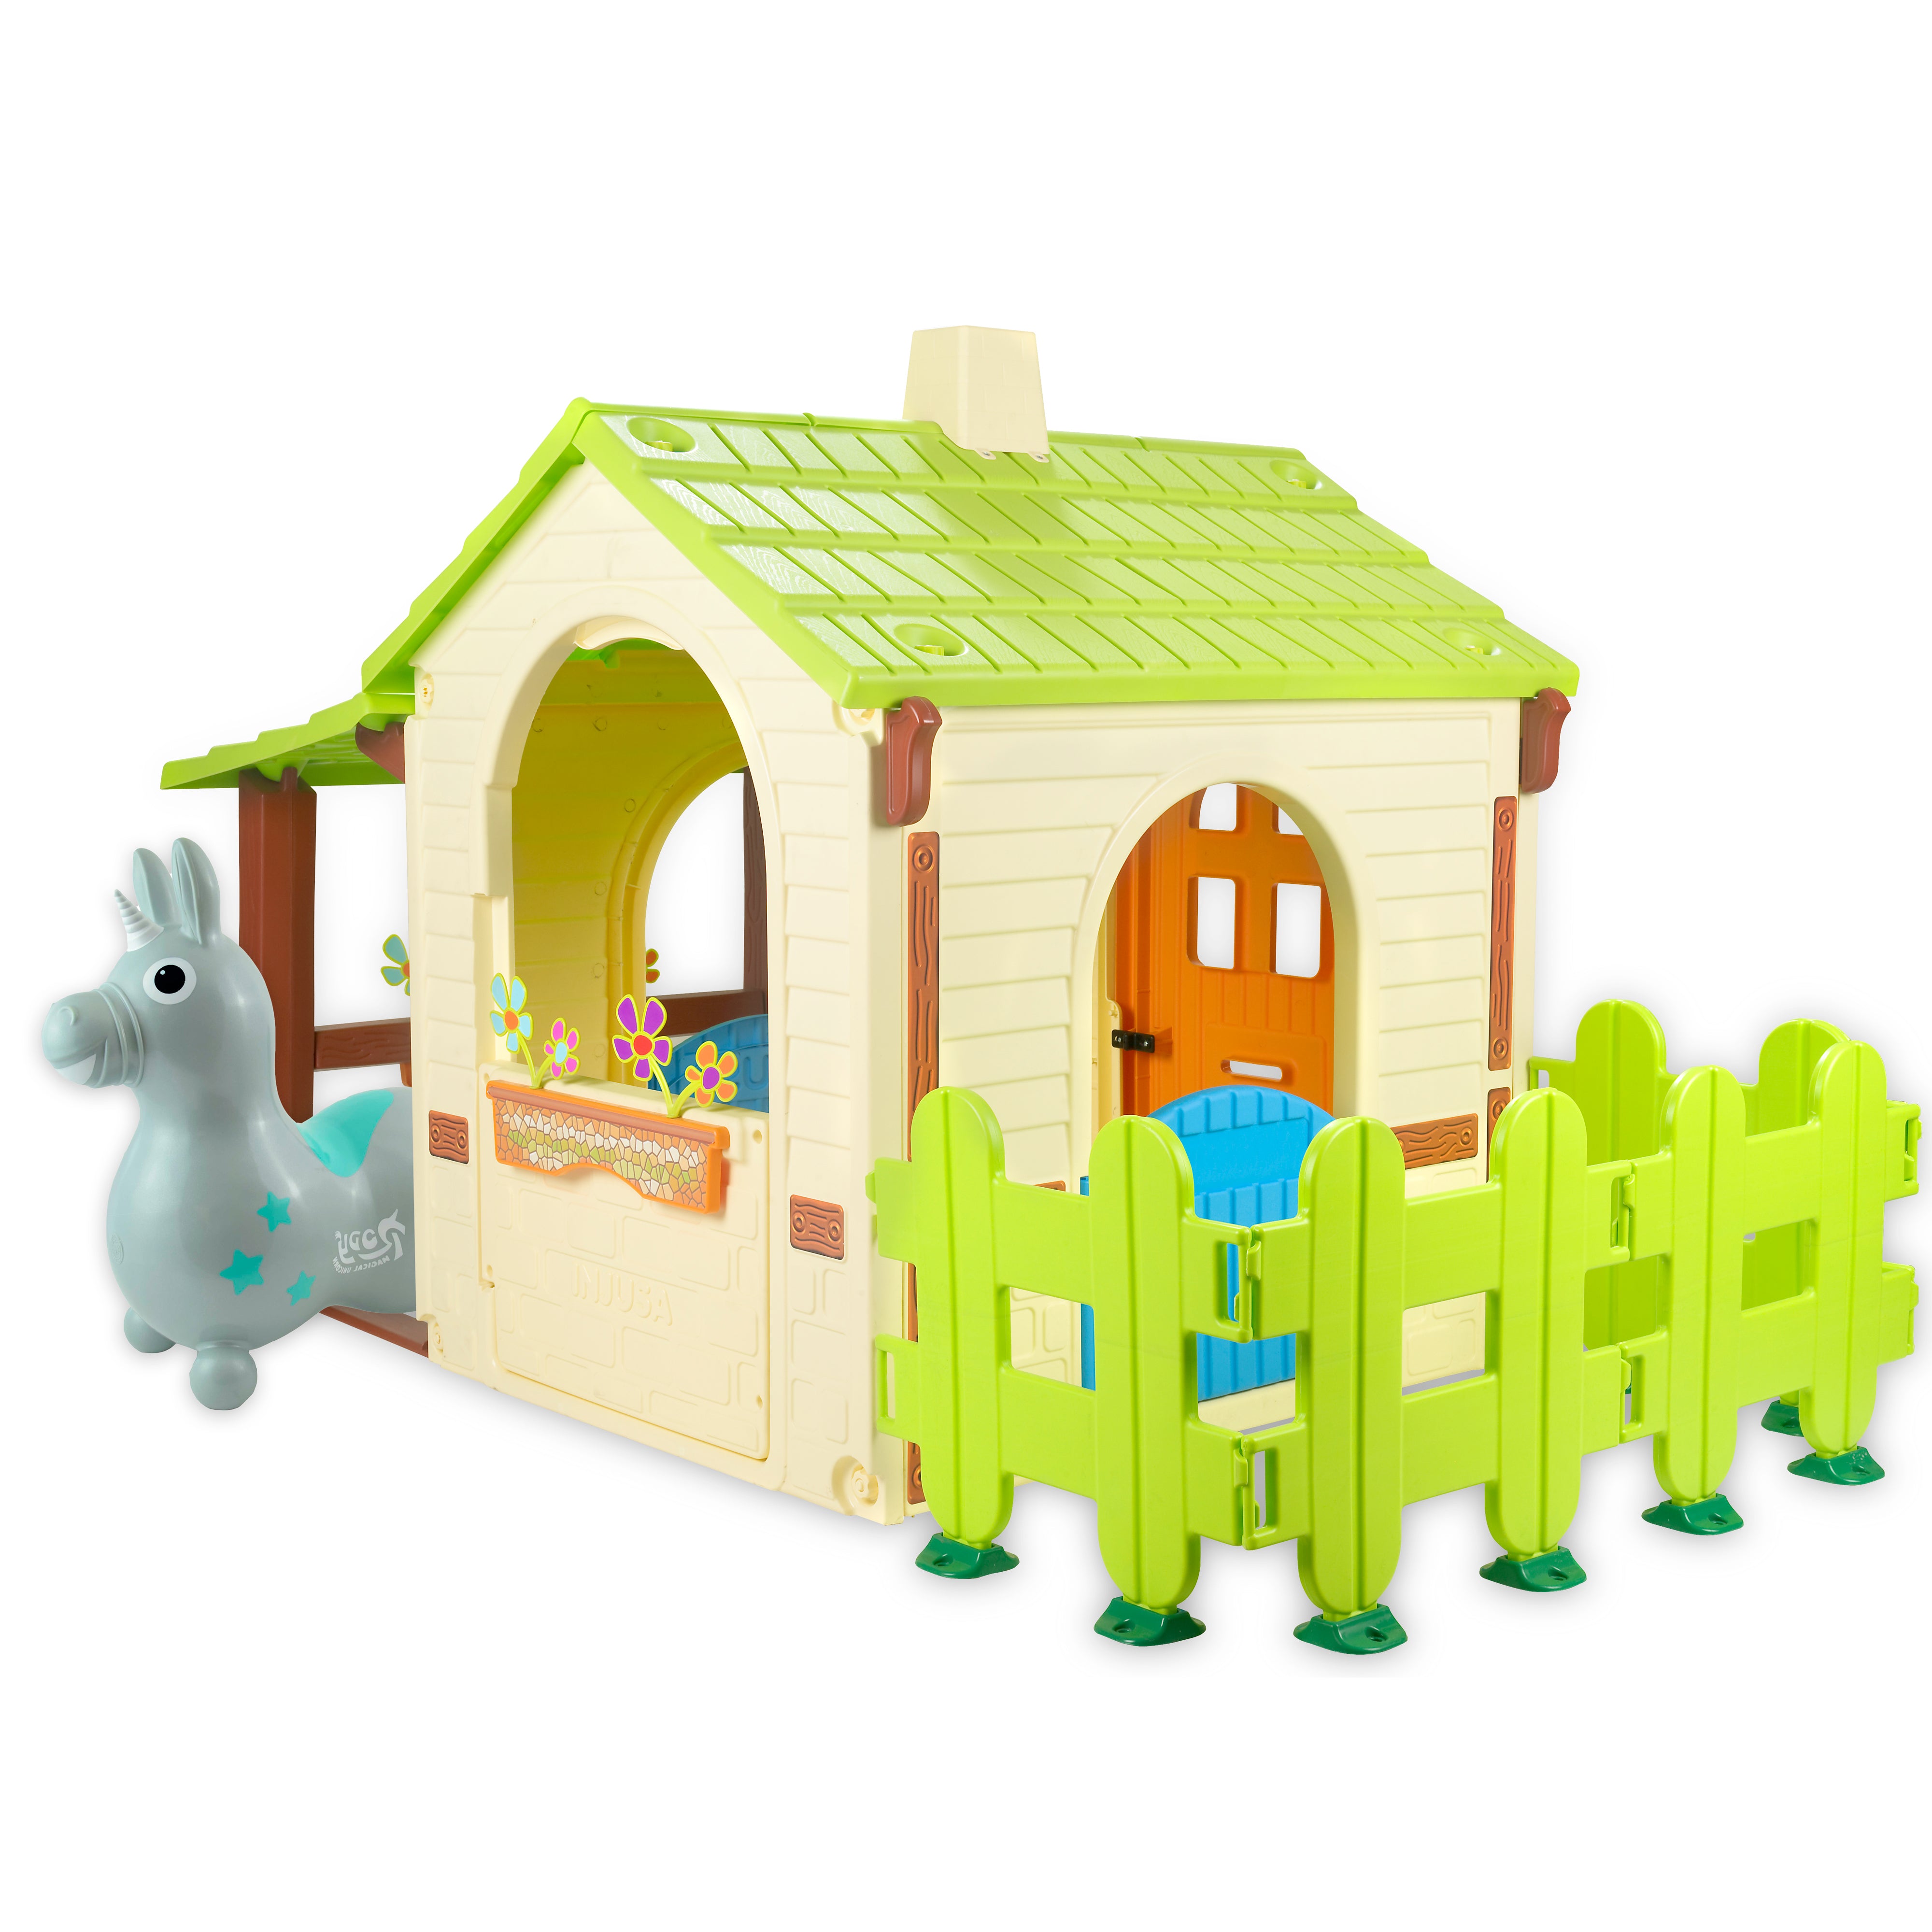 Studio image of the Country Playhouse with the Gray Rody Magical Unicorn.